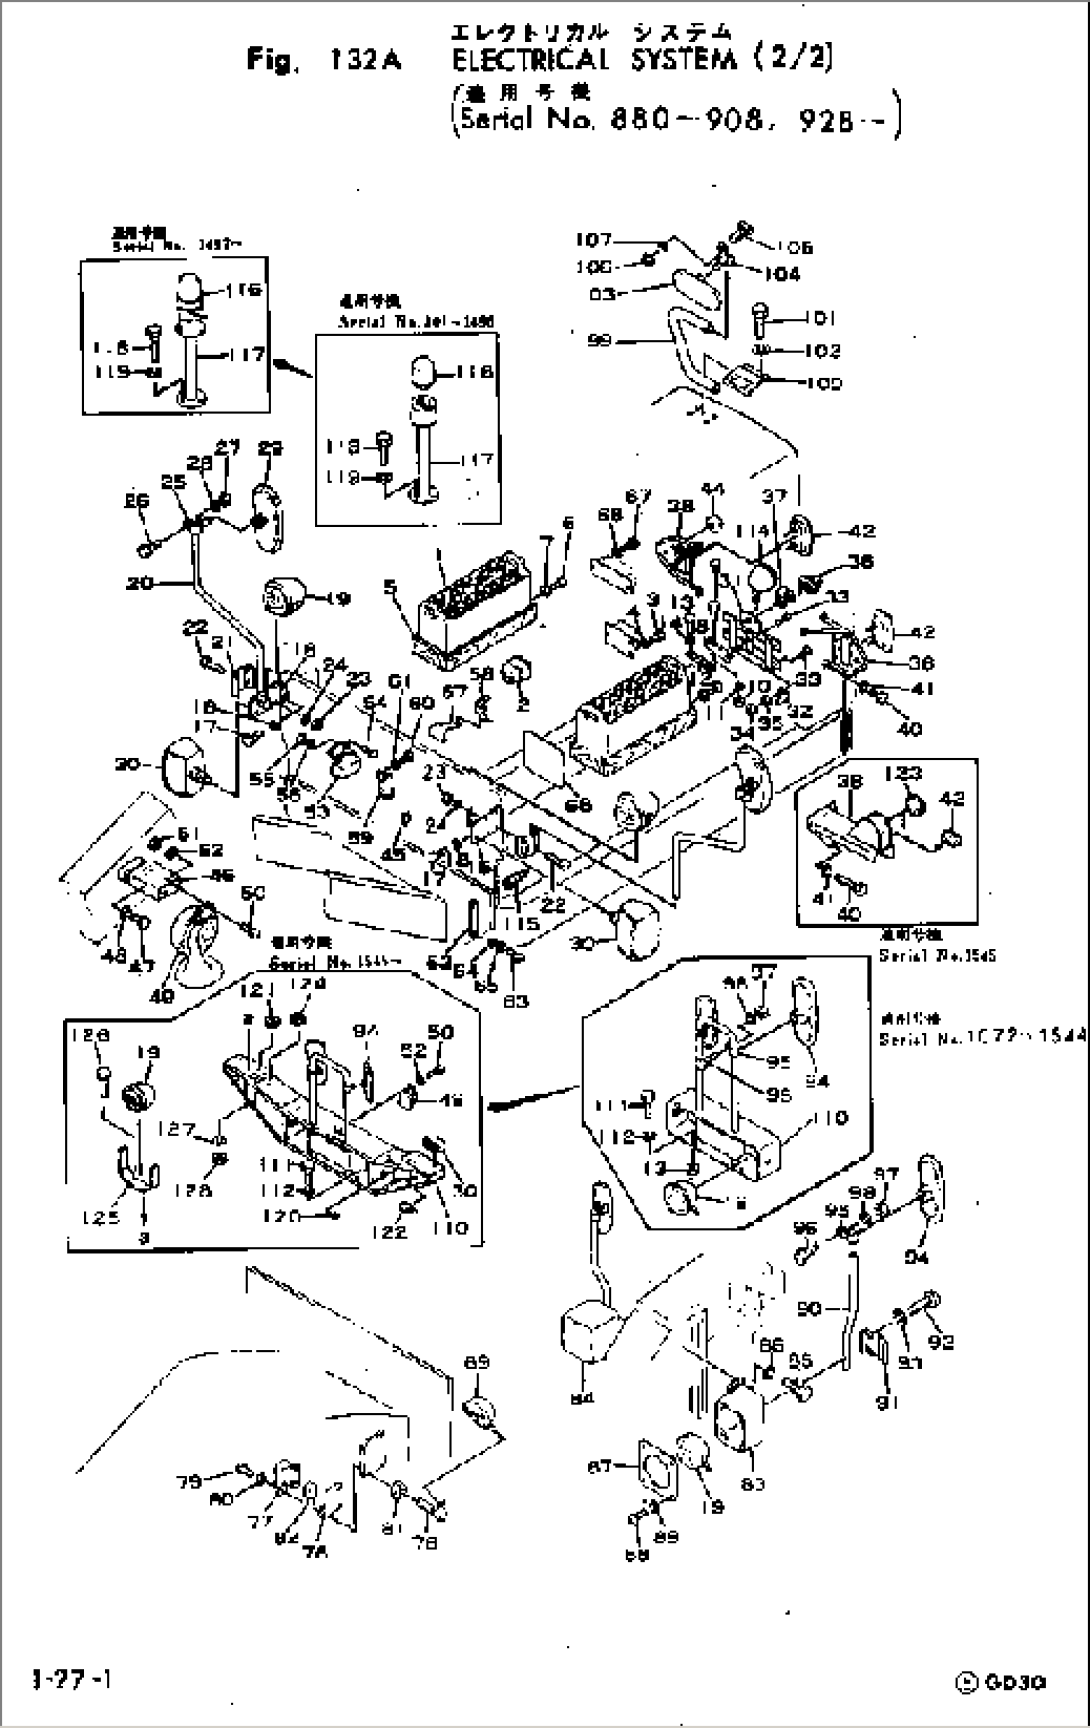 ELECTRICAL SYSTEM (2/2)(#928-)